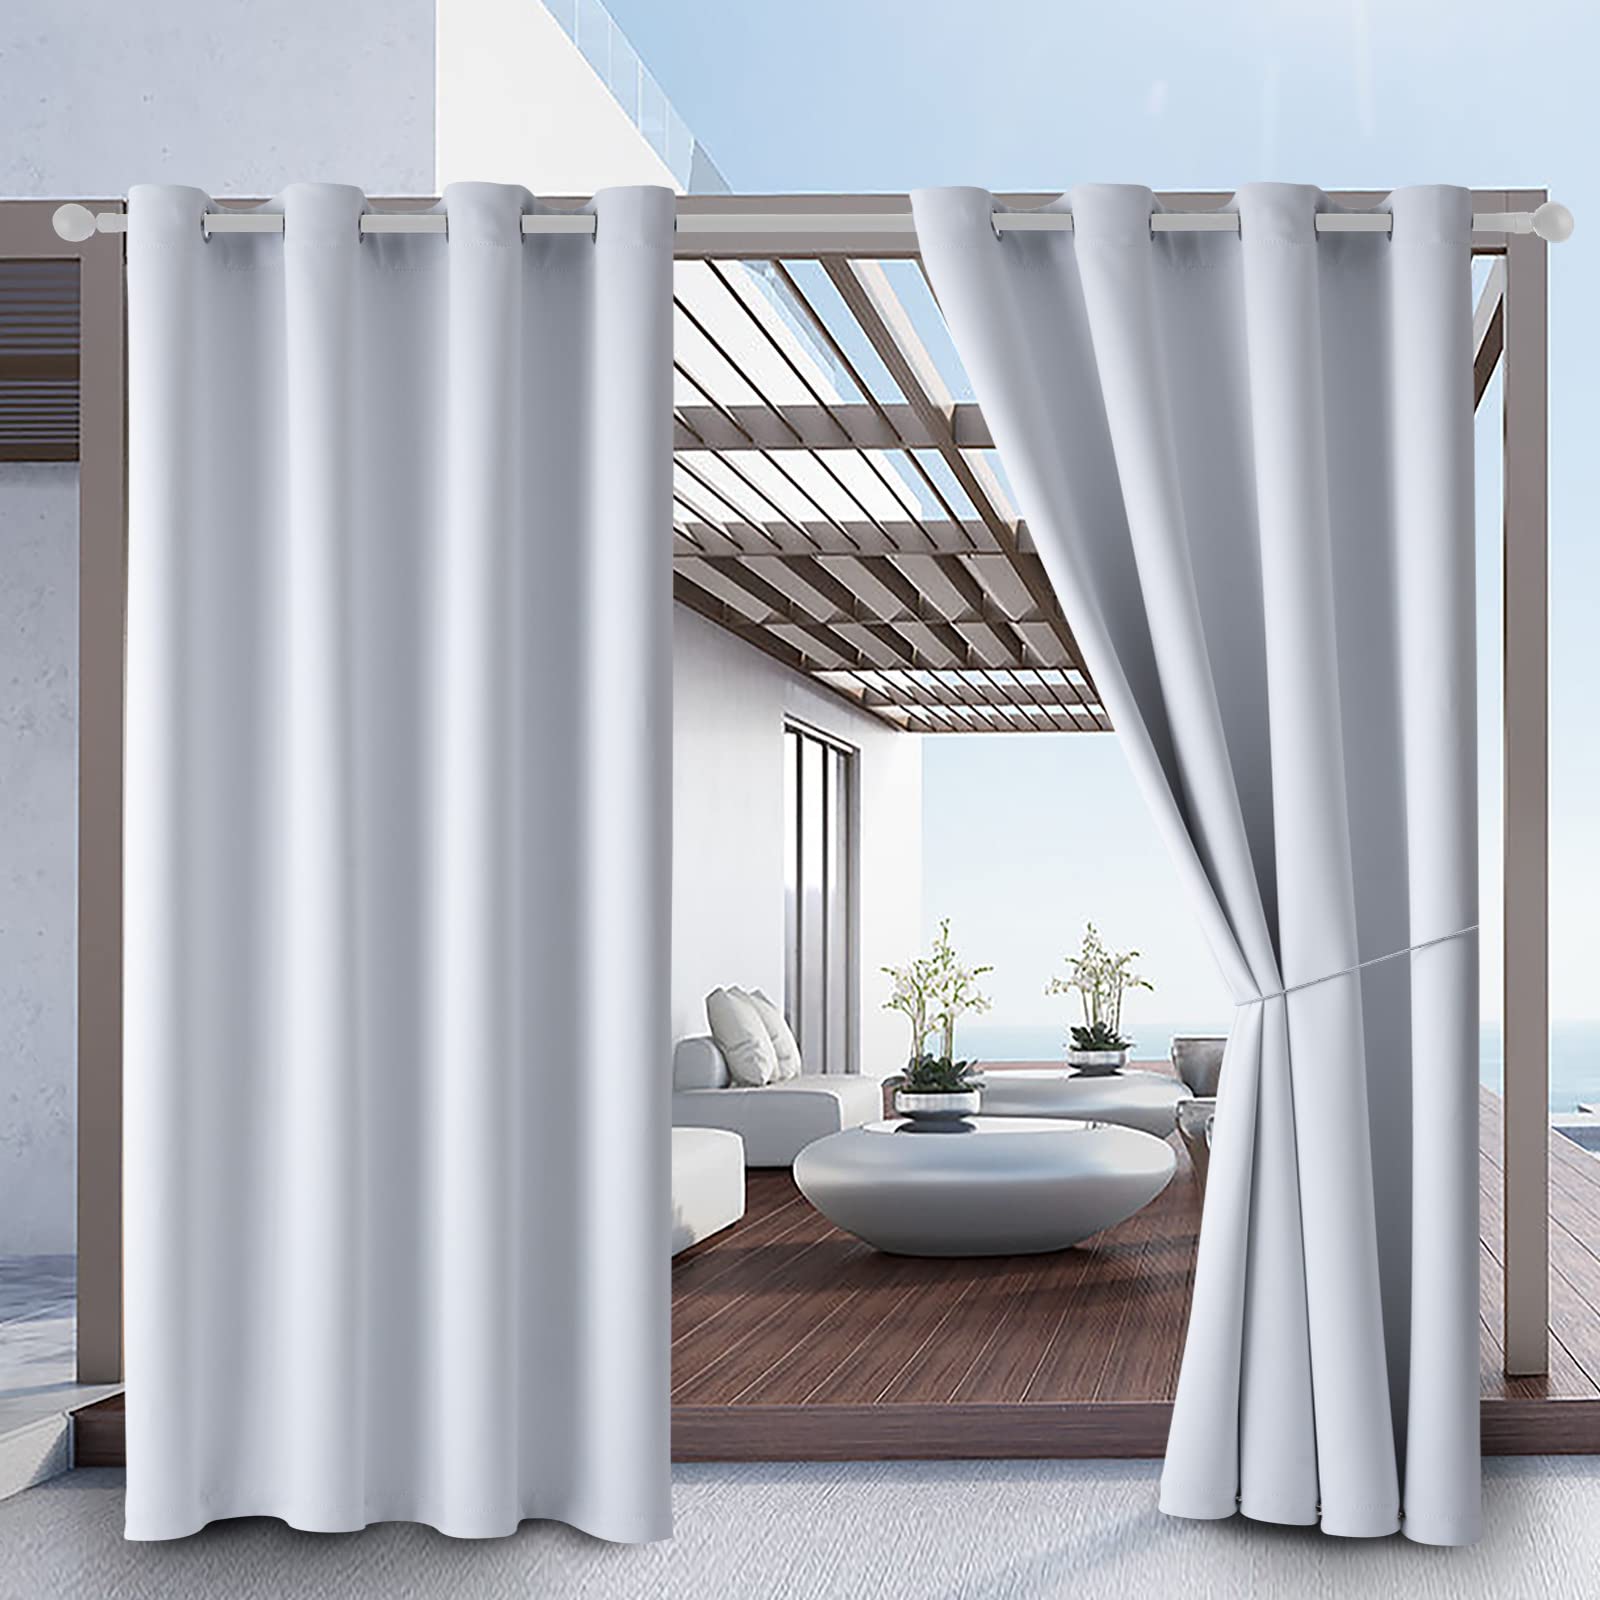 DIVA EN CAMINO DEC Water Proof Outside curtains with grommet Top for Porch, W52 x L72 Thermal Insulated Washable Light Block Outdoor Divider Drapes